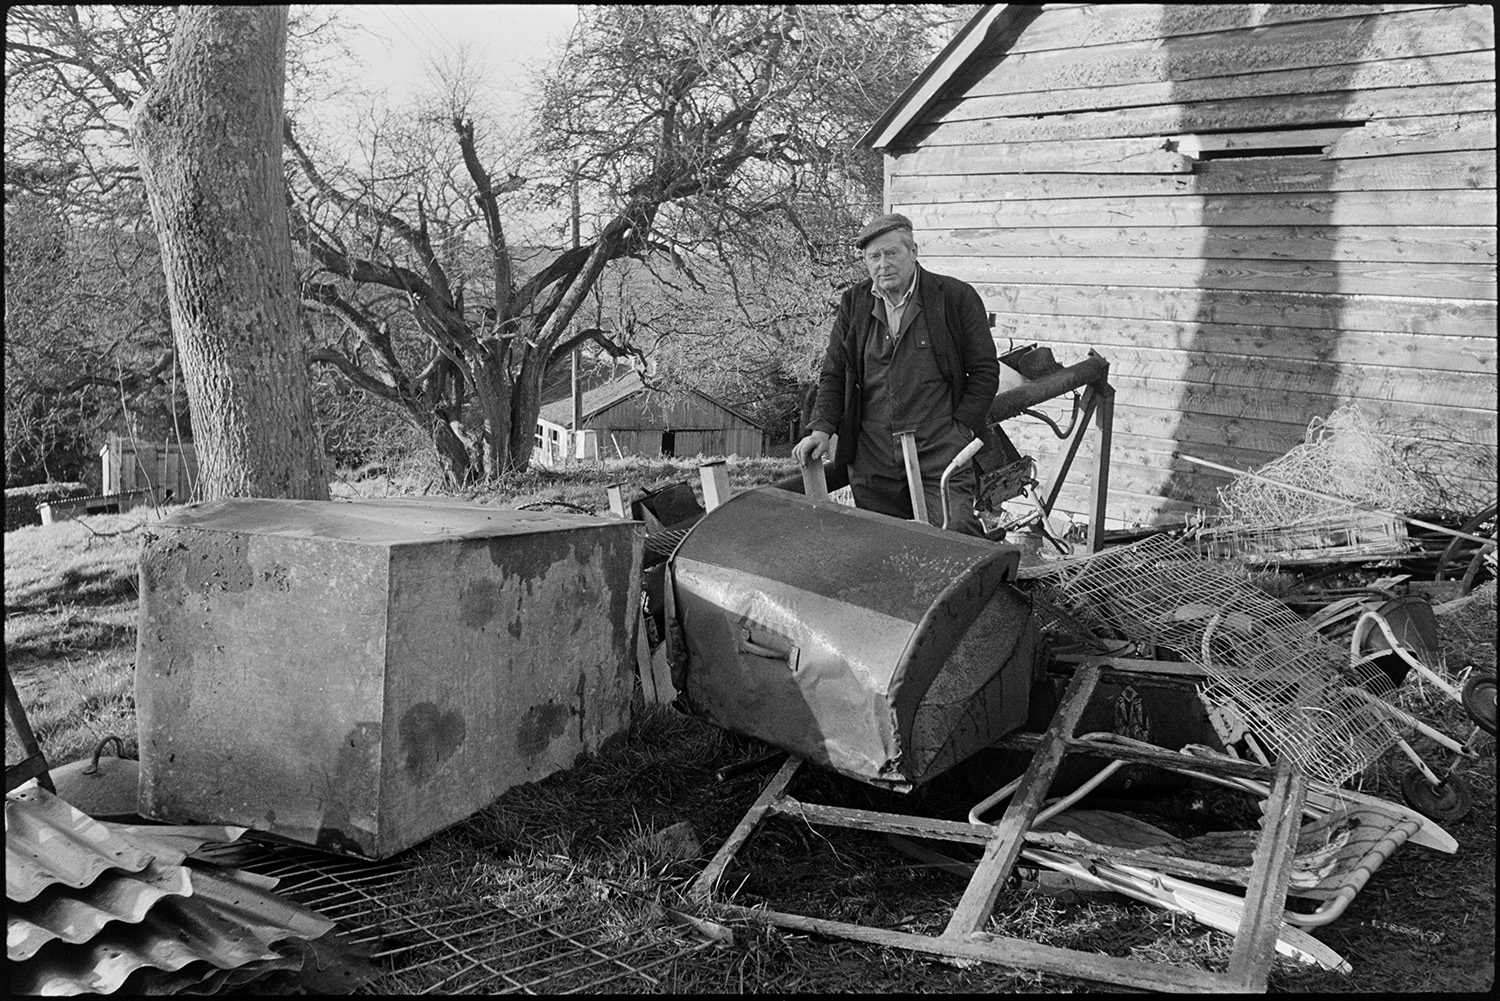 Scrap merchant sorting out scrap at country house sale.
[Jimmy Hughes, a scrap merchant, looking at a pile of scrap metal items including a bin, a tank and a window frame, at a sale at Colleton Manor, Chulmleigh. In the background is a large wooden barn.]